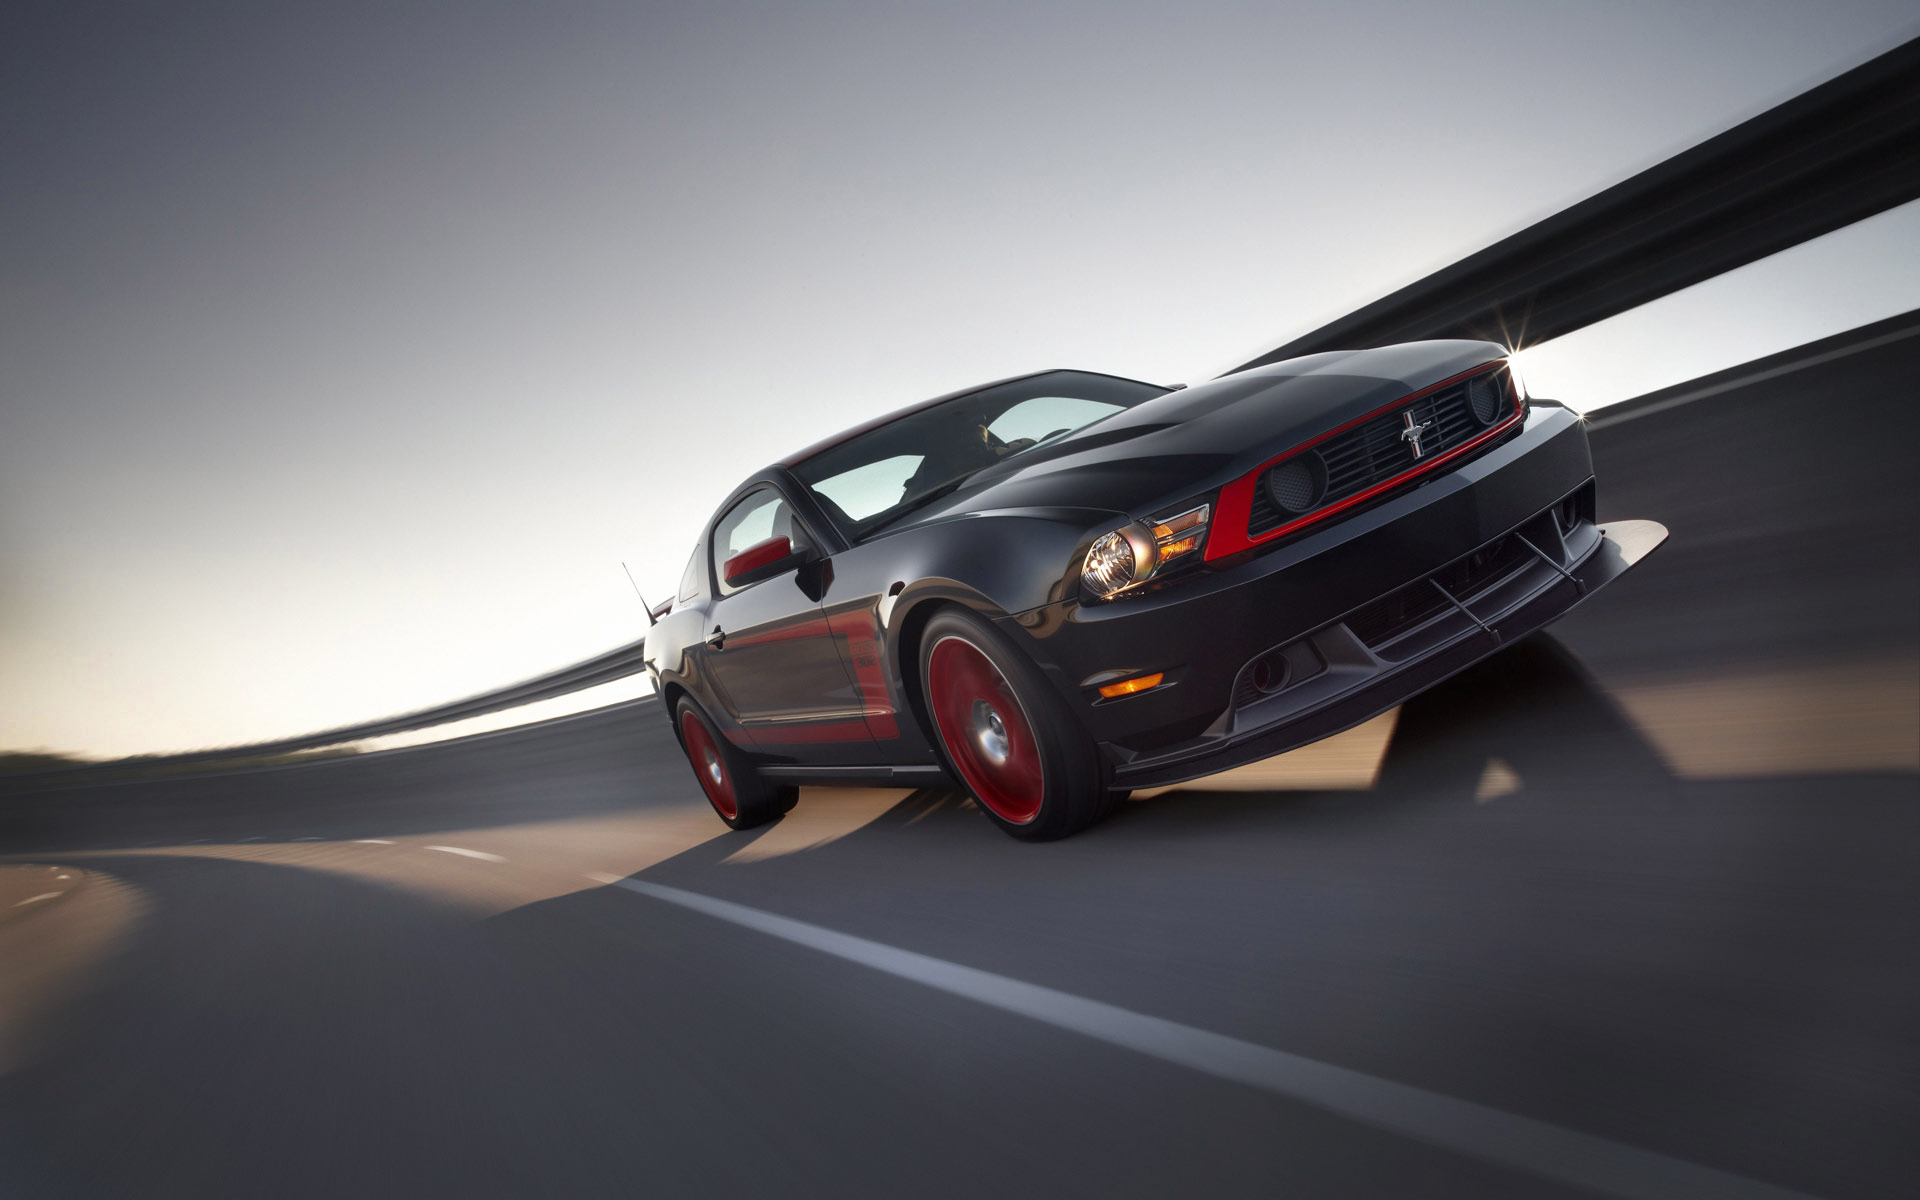 Ford Mustang Boss 302 Laguna Seca: A sleek and powerful car surrounded by a vibrant background.